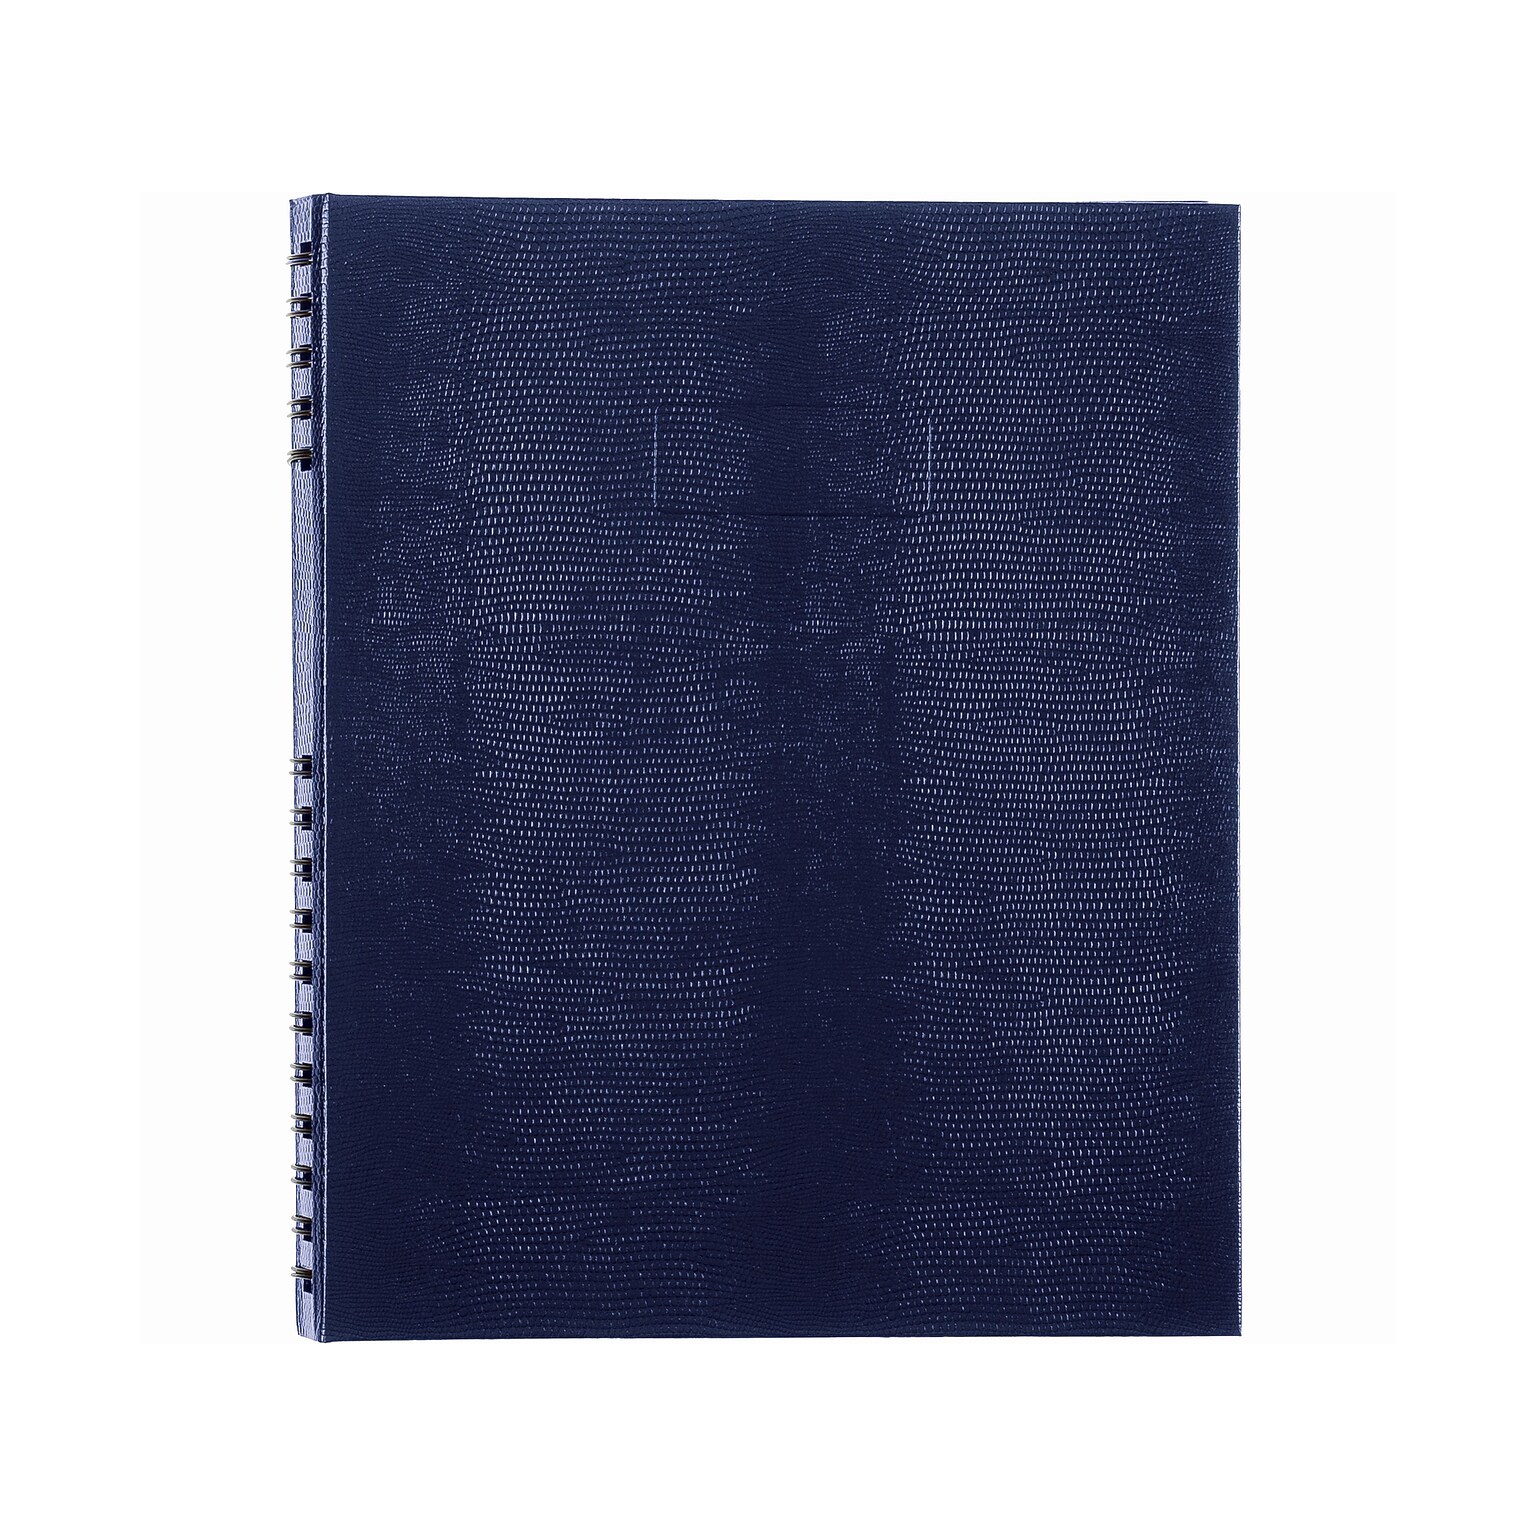 Blueline NotePro Hardcover Executive Journal, 8.5 x 10.75, Wide-Ruled, Indigo Blue, 200 Pages (A10200.BLU)